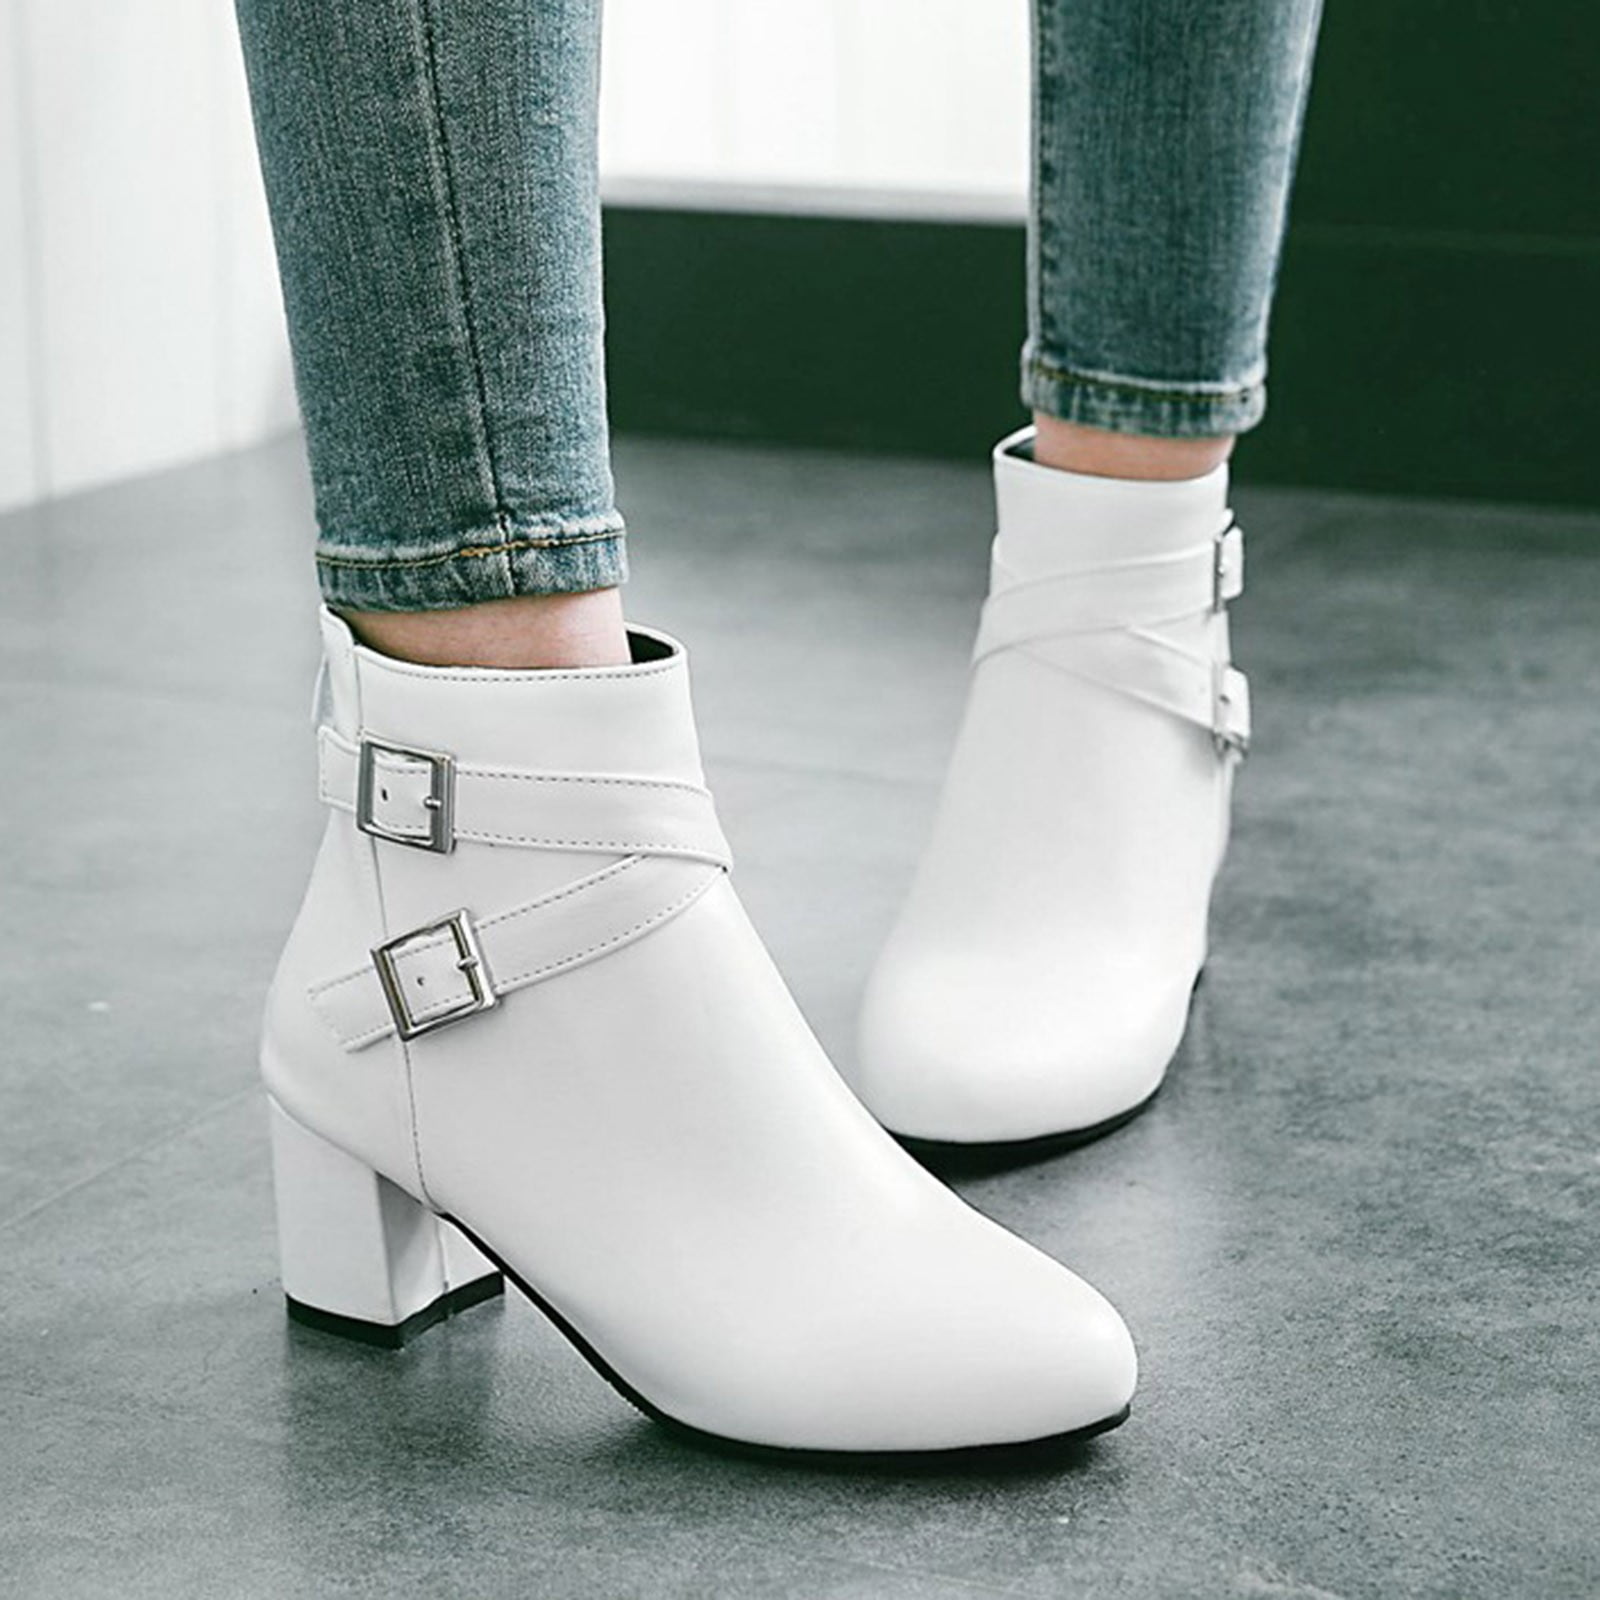 Roper Womens White Leather Betsy Open Toe Ankle Boots – The Western Company